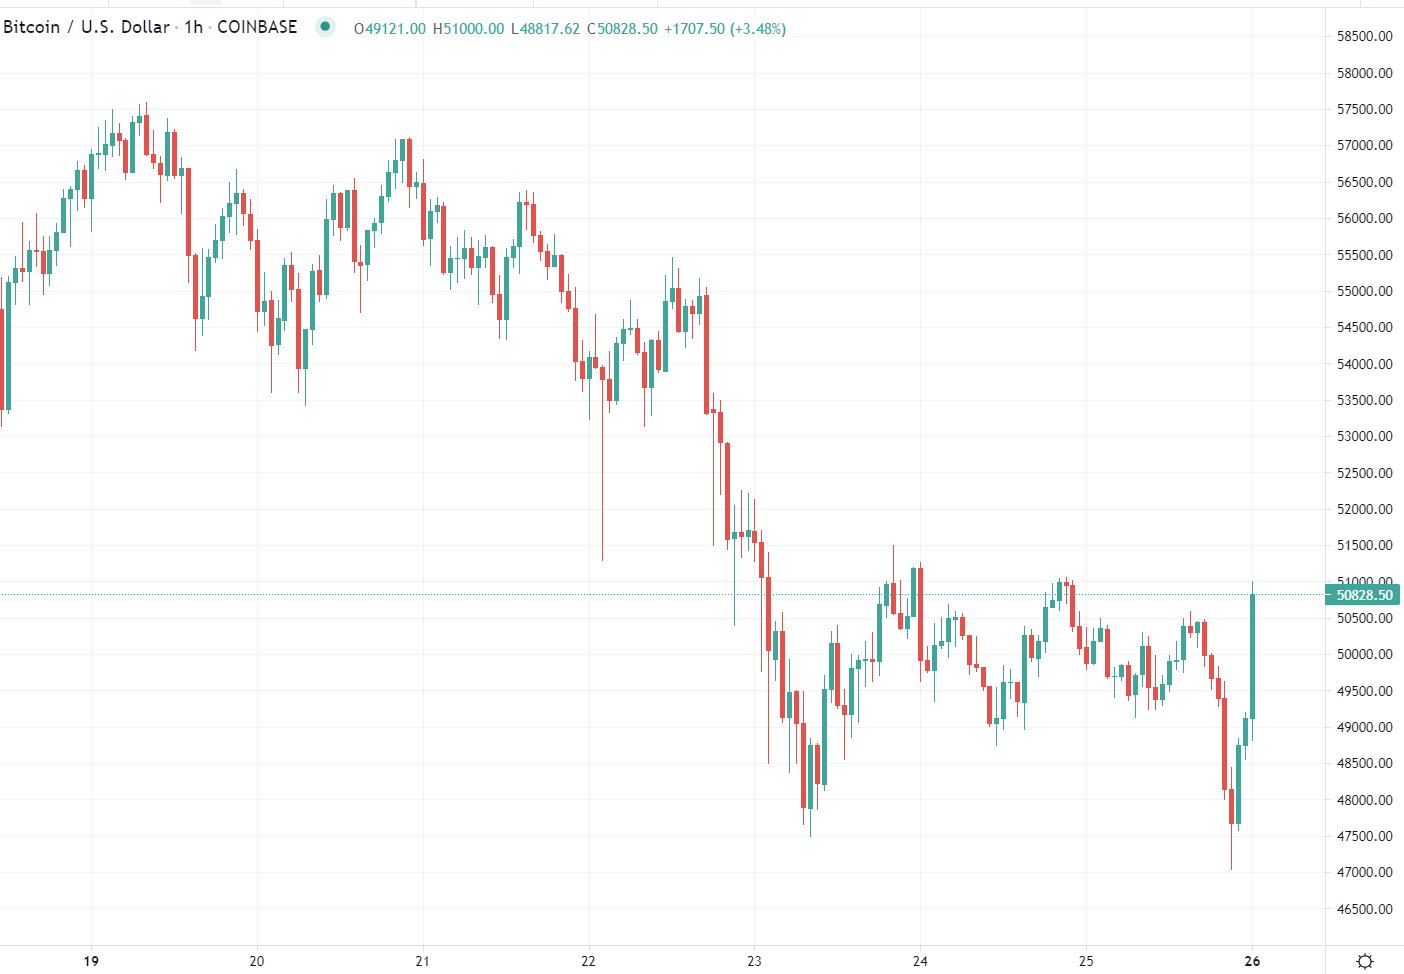 A slump for BTC earlier took it to nearly $47K